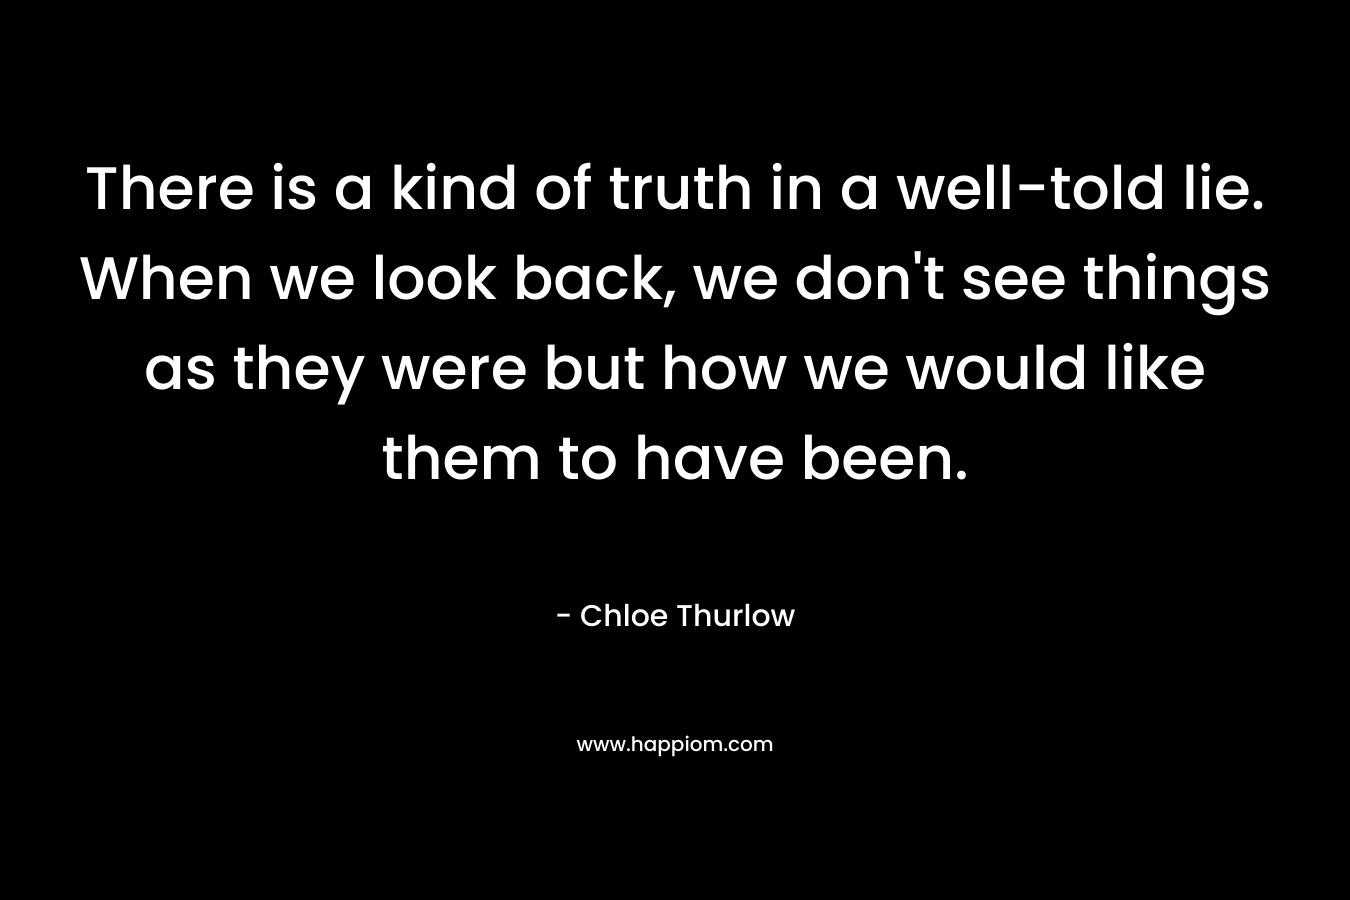 There is a kind of truth in a well-told lie. When we look back, we don’t see things as they were but how we would like them to have been. – Chloe Thurlow